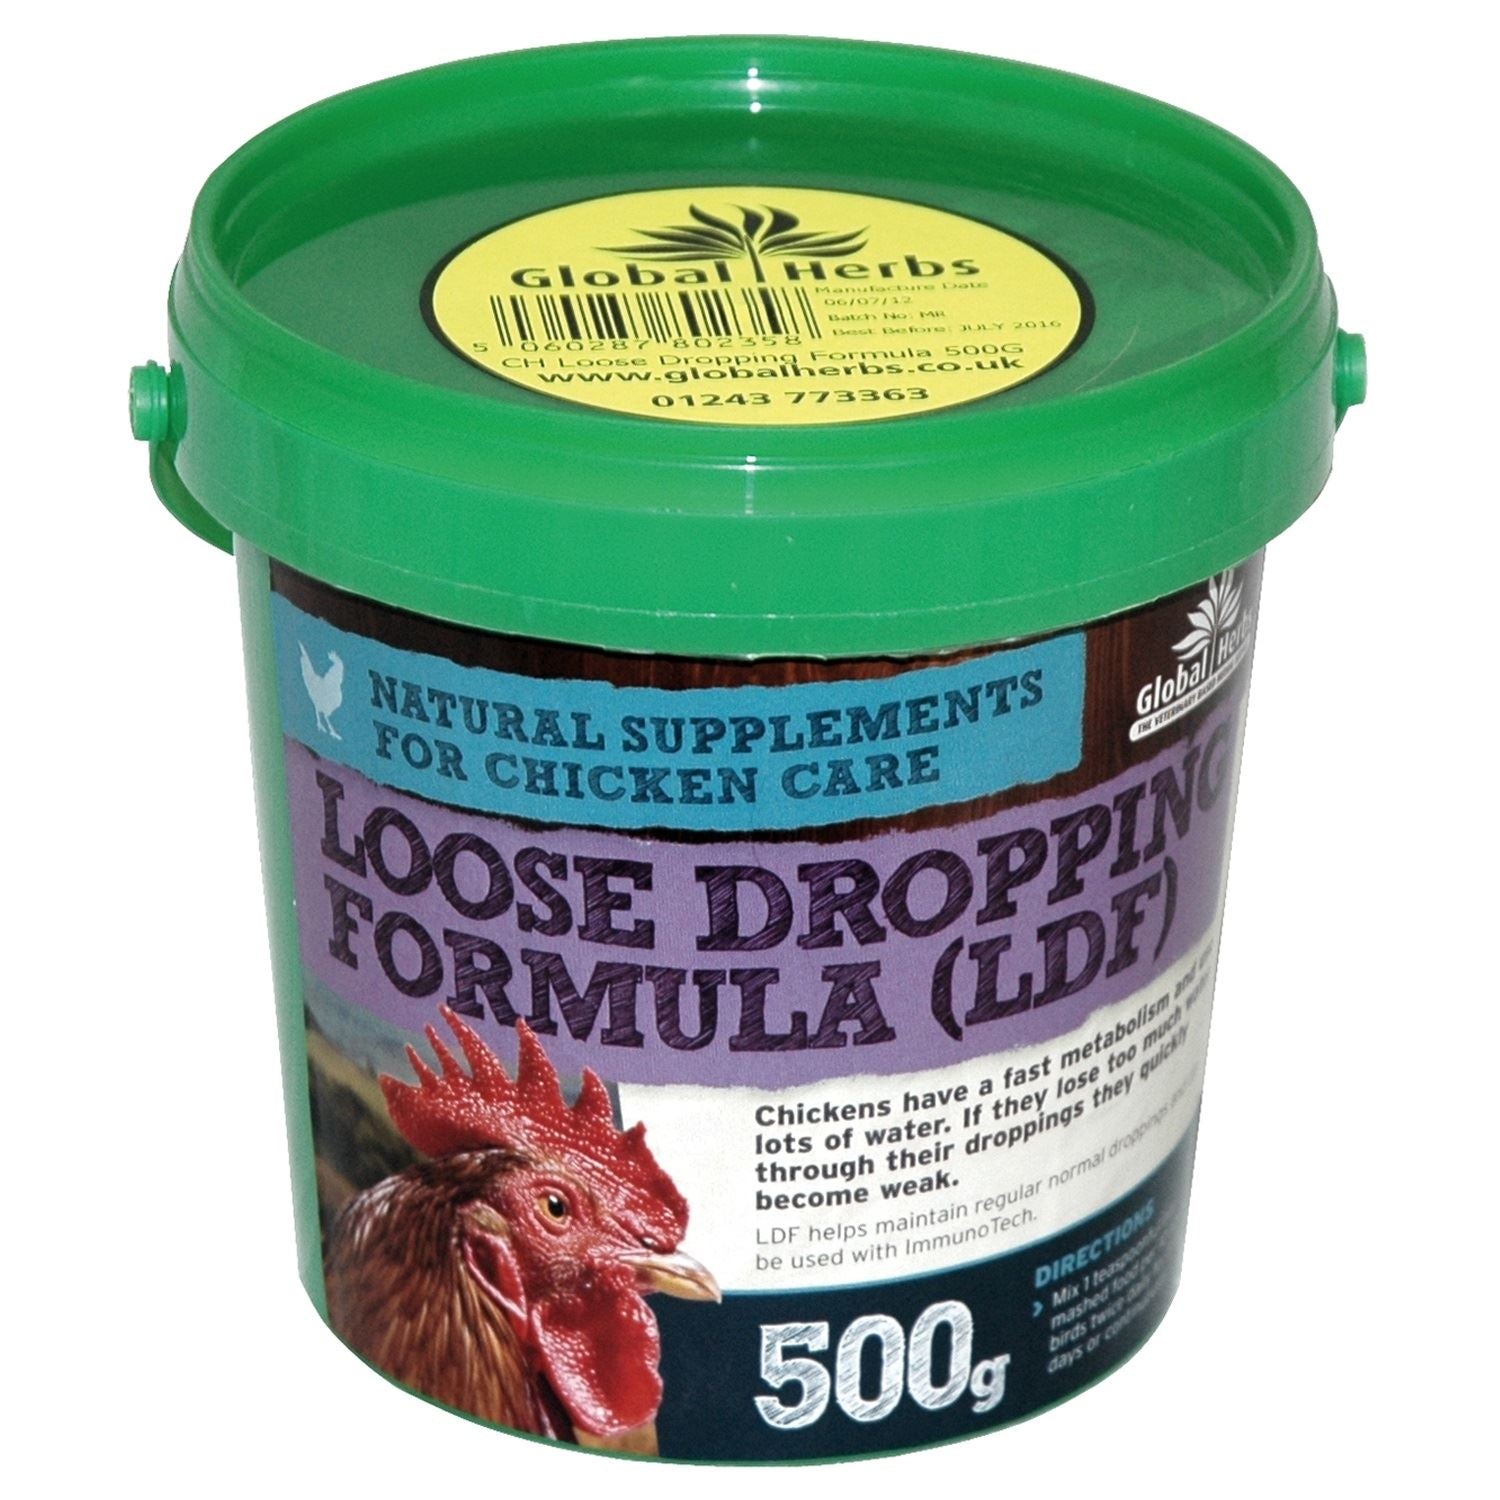 Global Herbs Poultry Loose Dropping Formula - Just Horse Riders